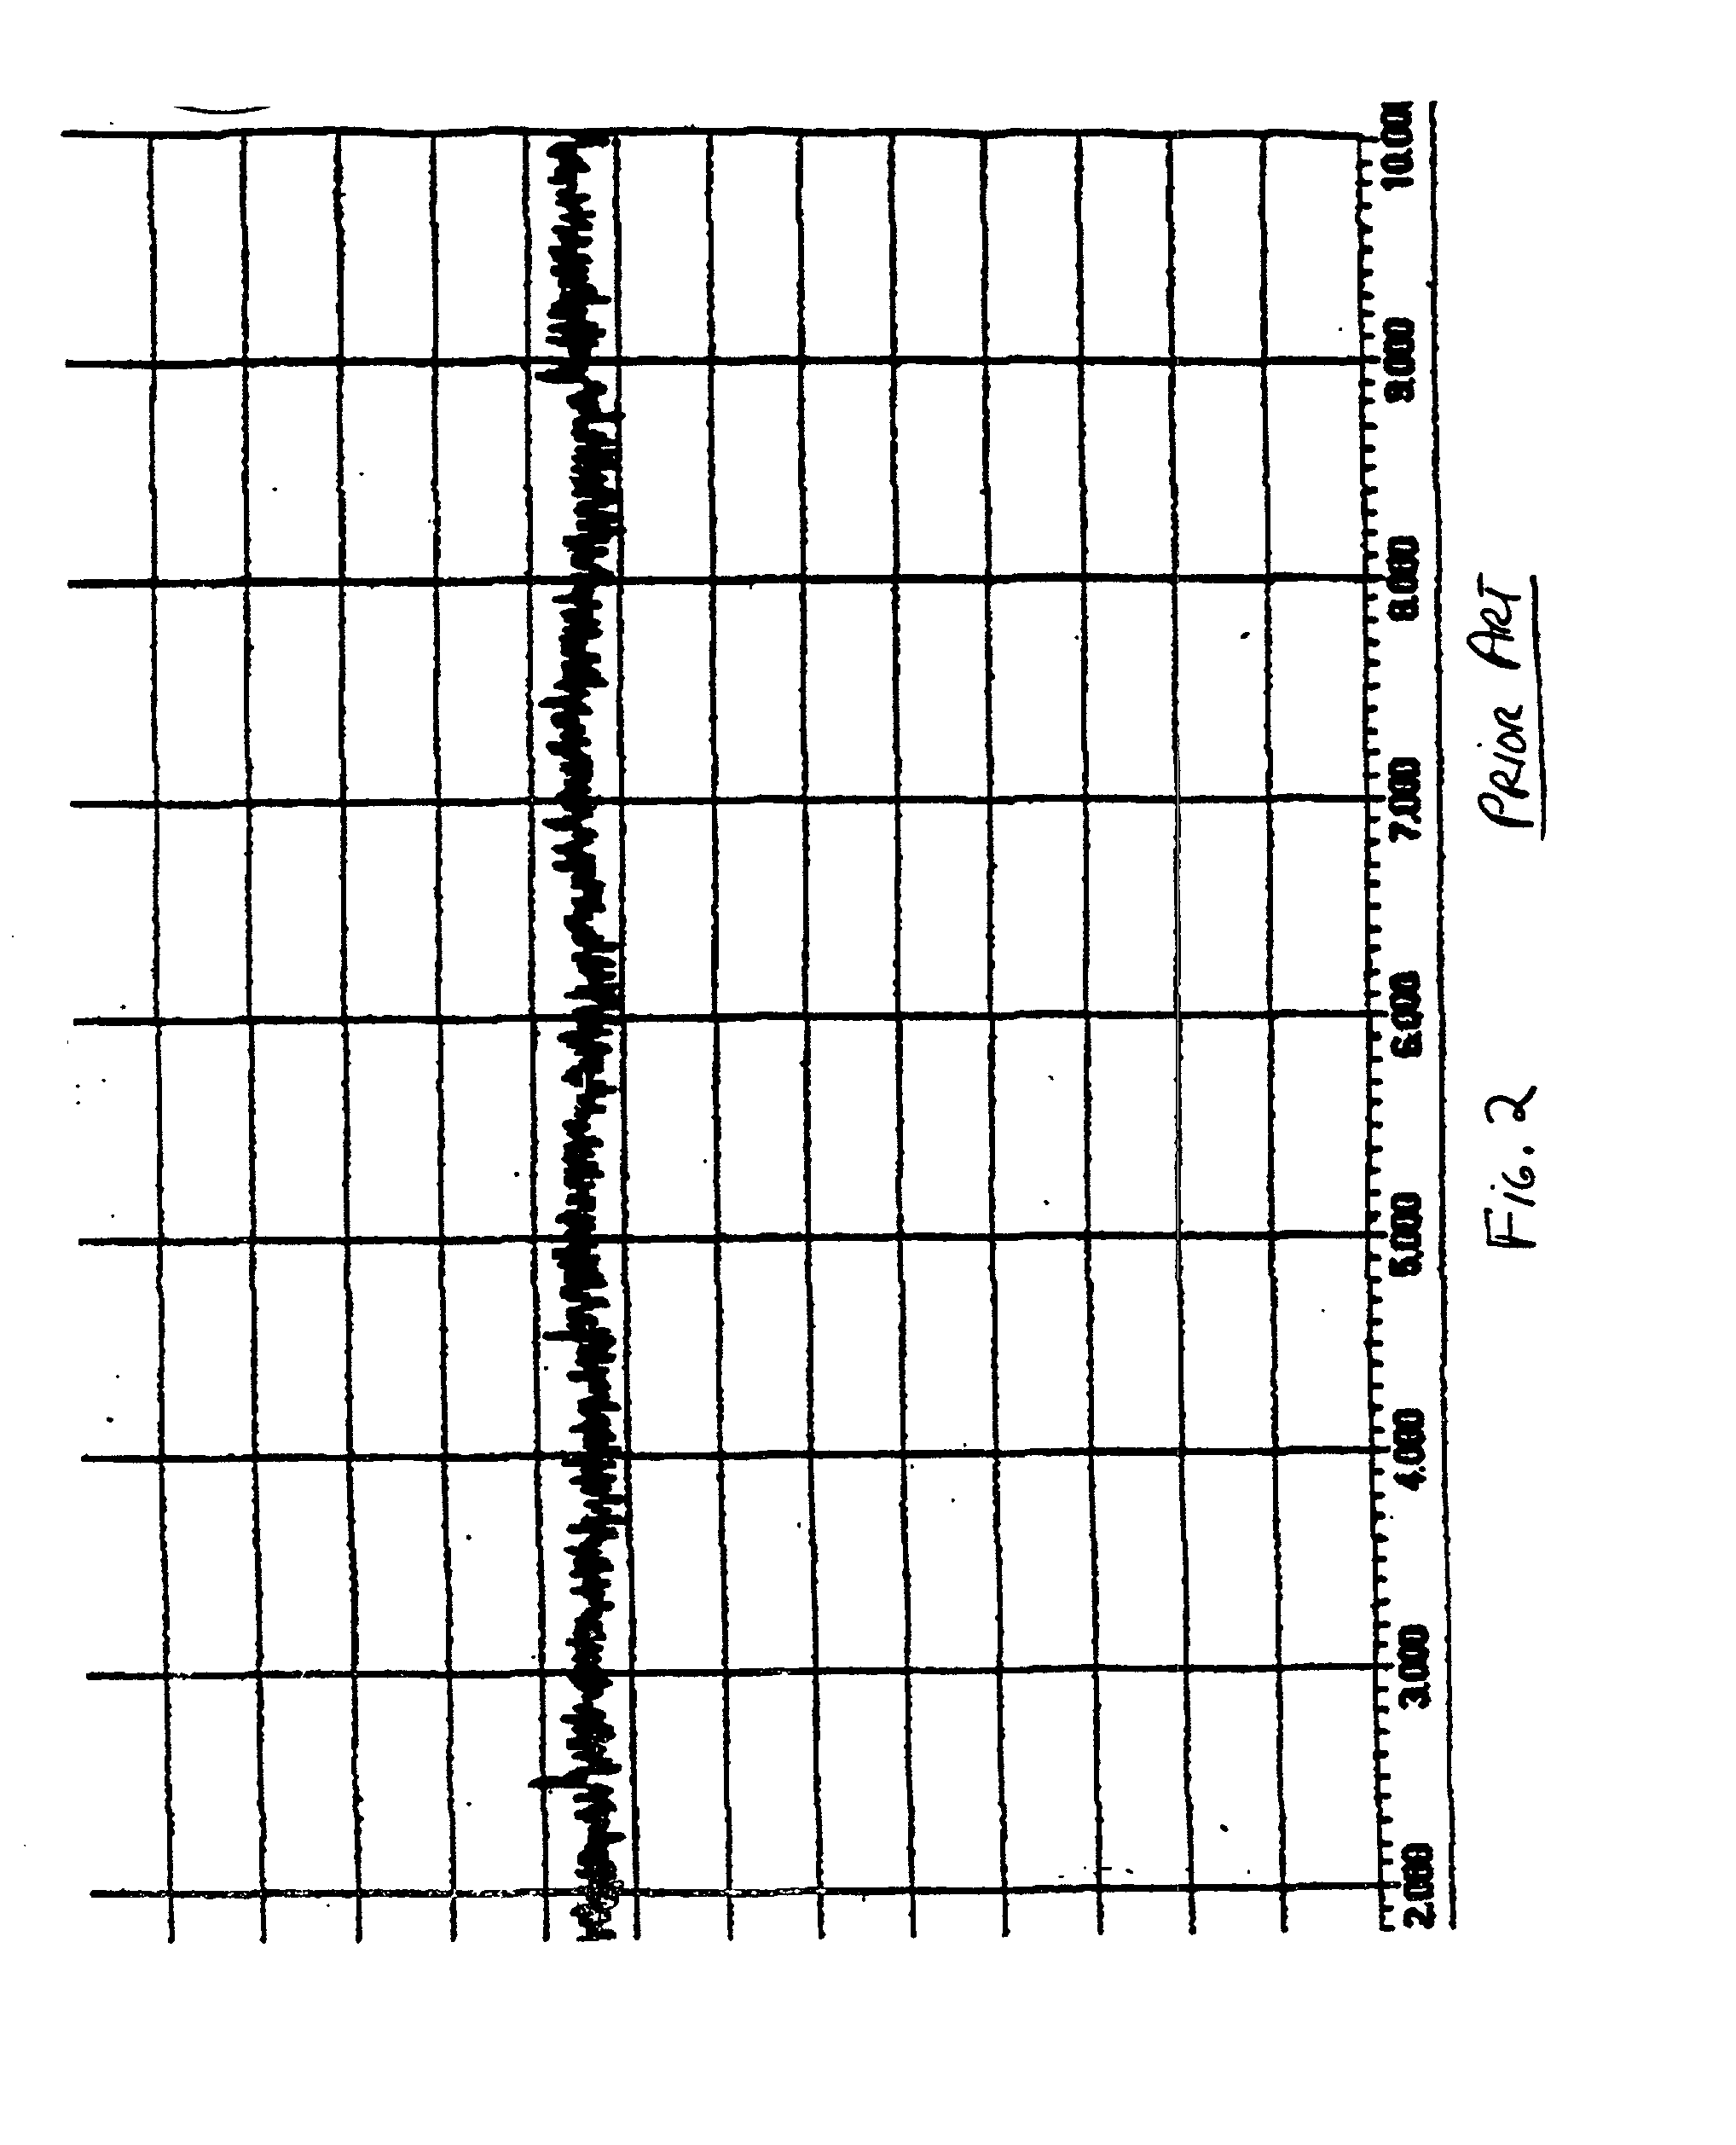 Method and apparatus for injecting sighs during the administration of continuous positive airway pressure therapy